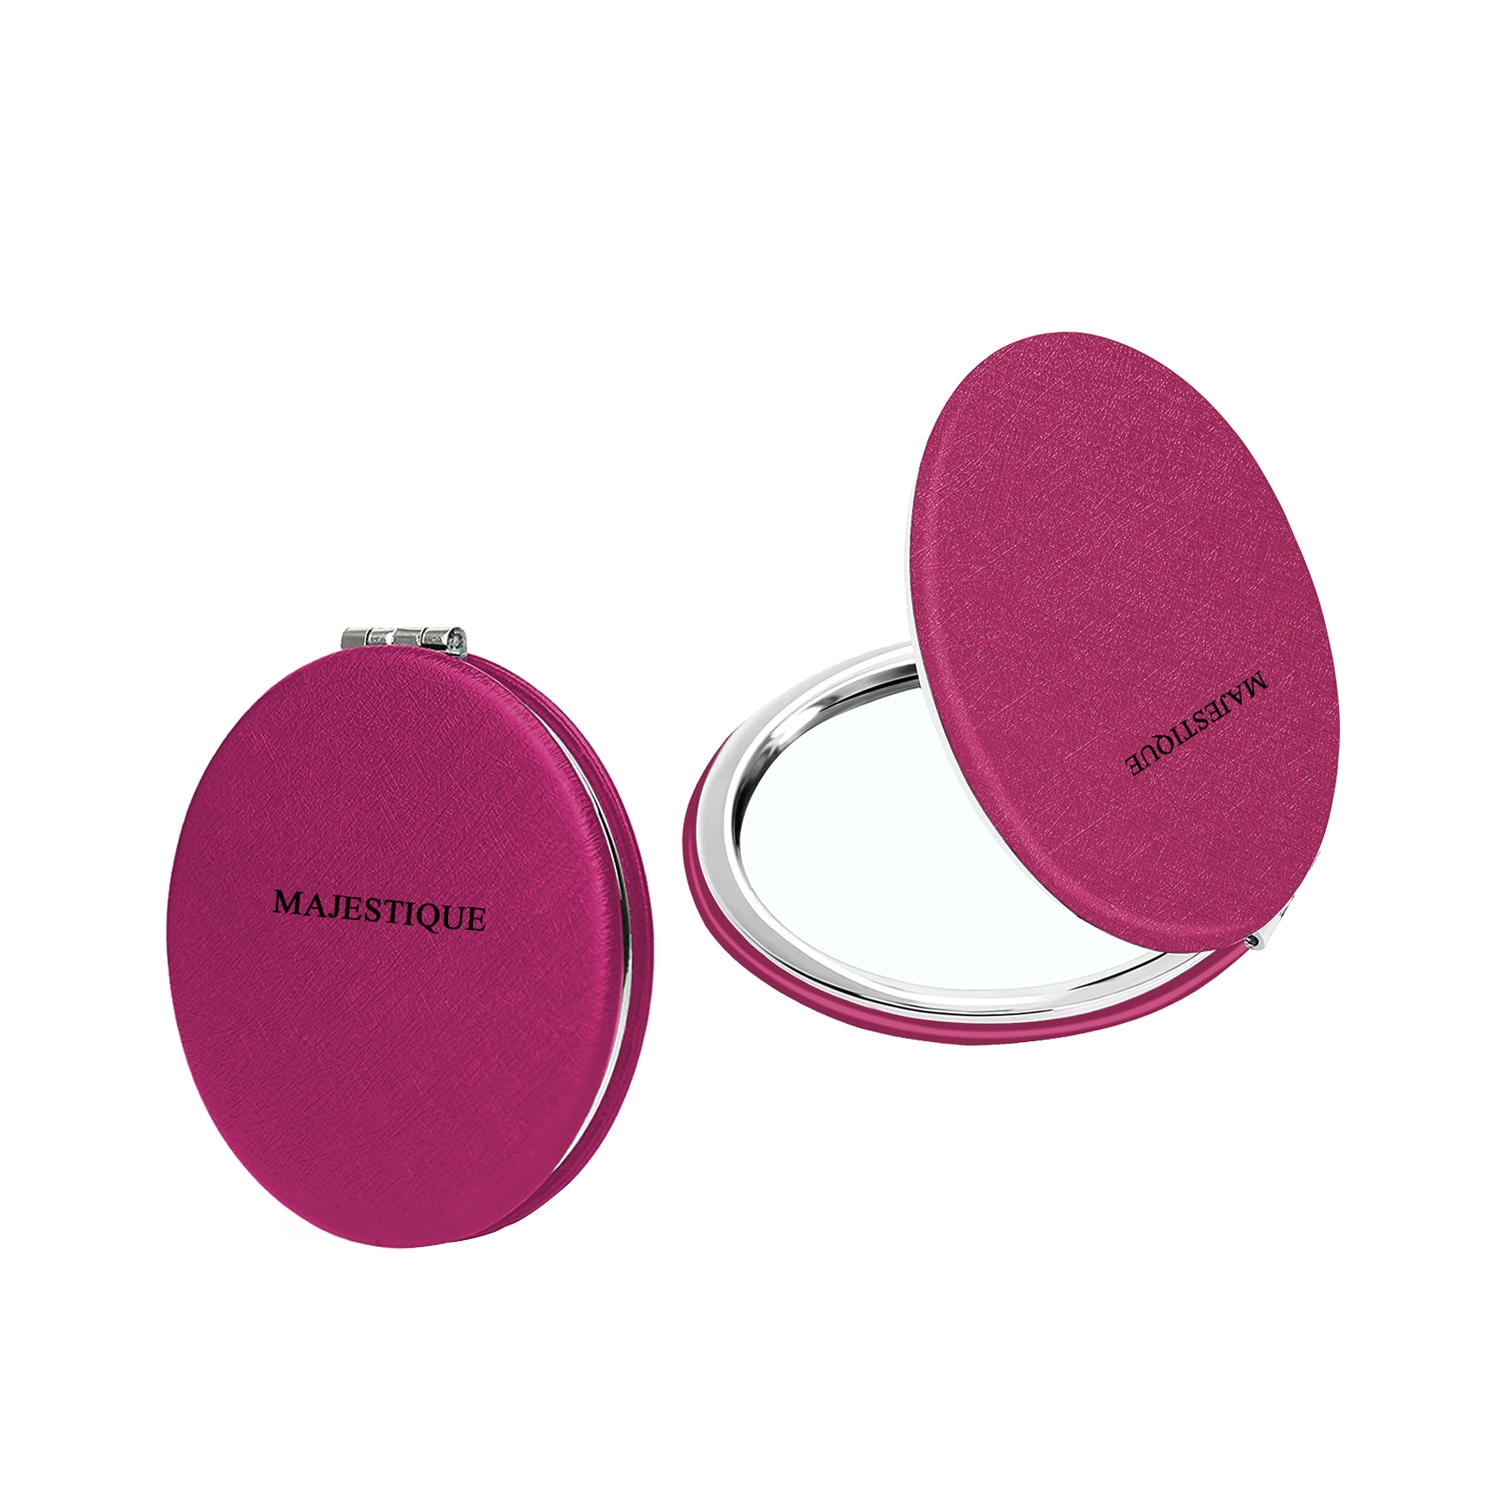 Majestique | Majestique Professional Pocket Makeup Foldable Mirror With Compact Size - Pink